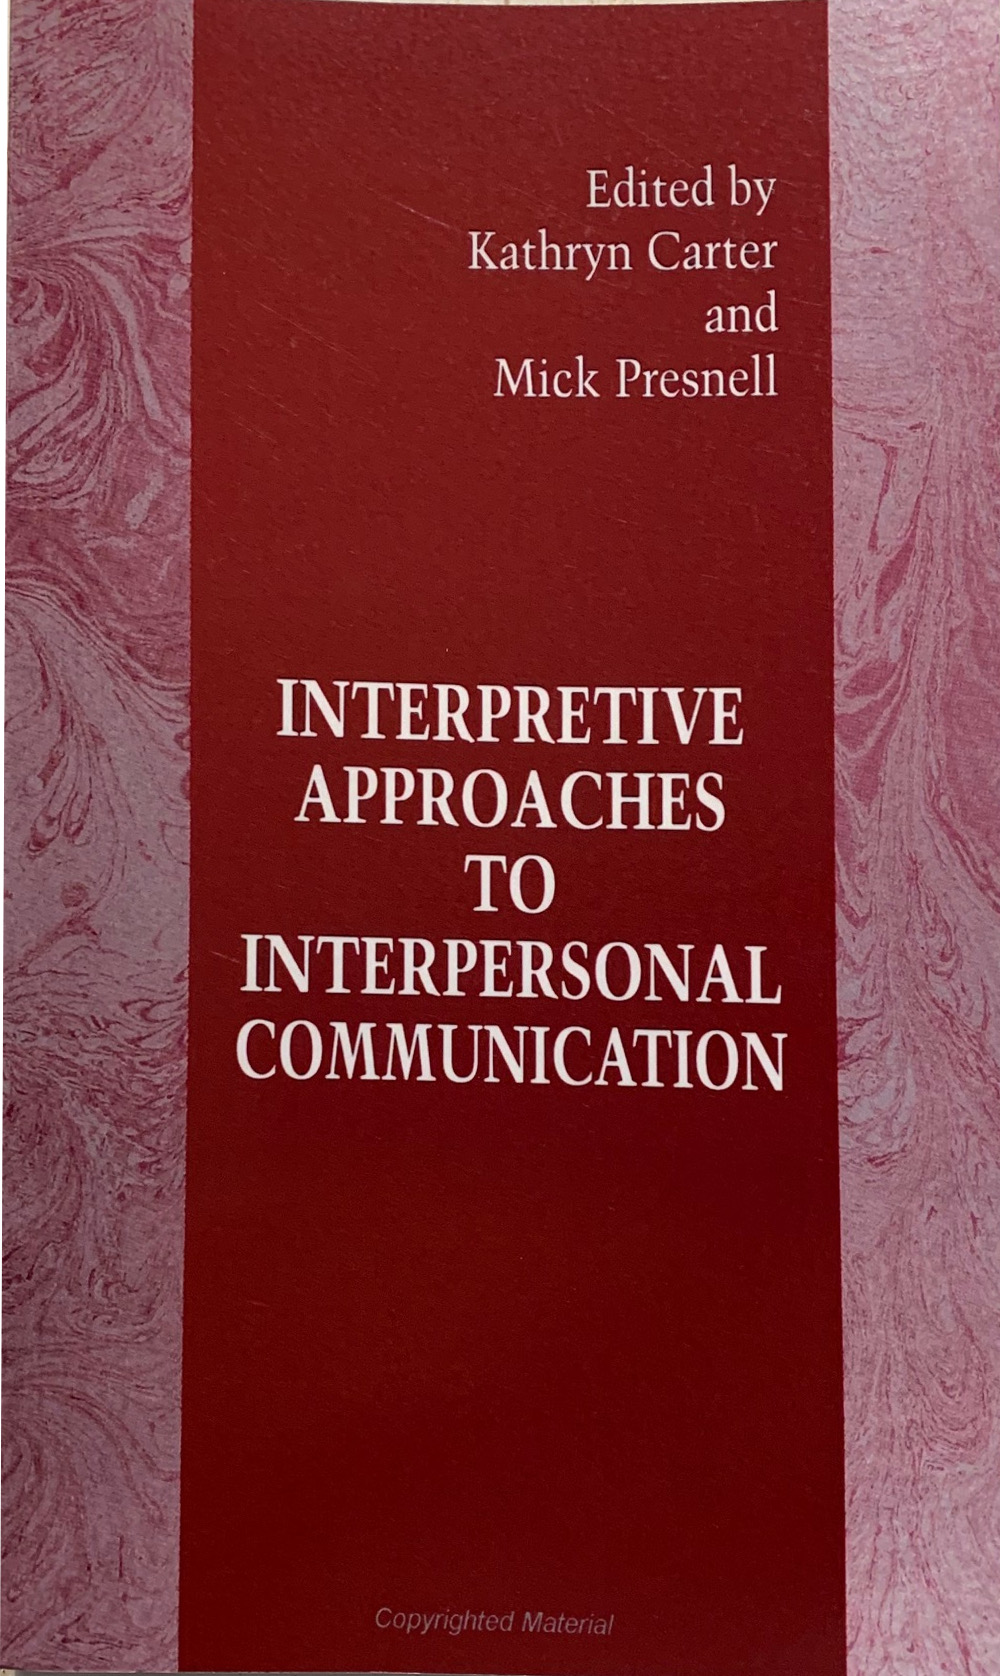 Interpretive approaches to interpersonal communication